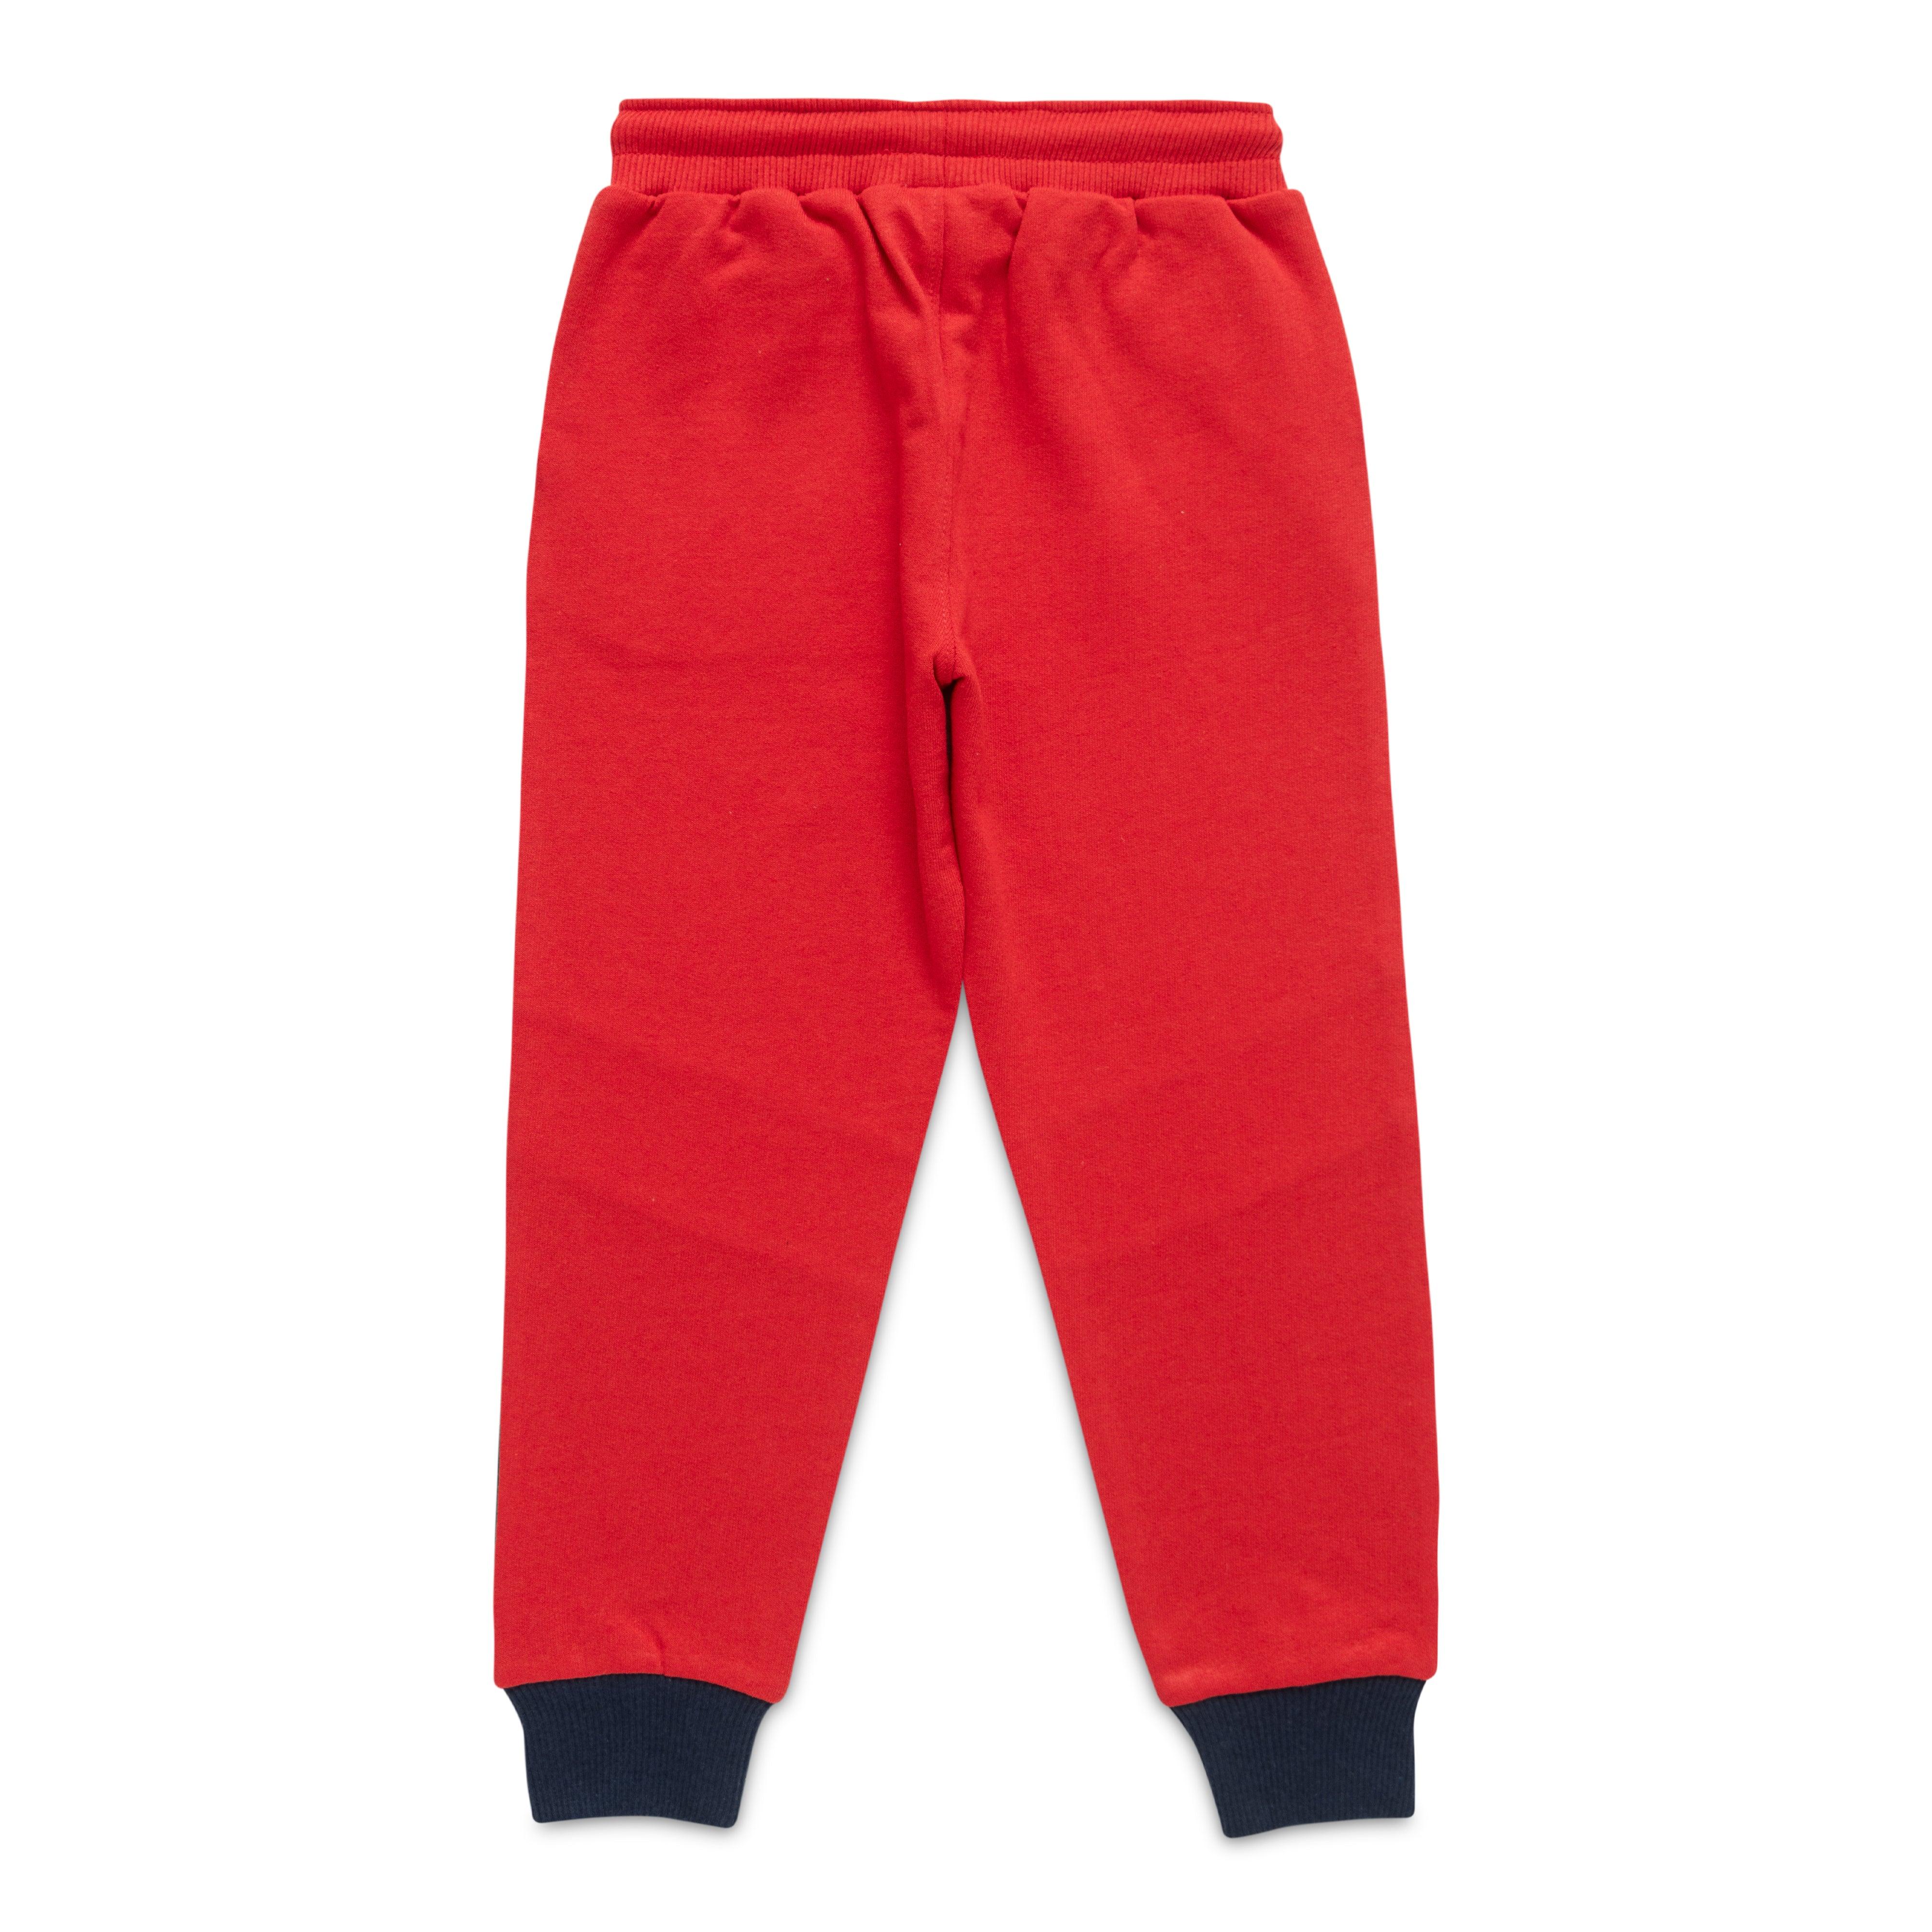 RBW Colorblock Joggers FREE SHIPPING & RETURNS